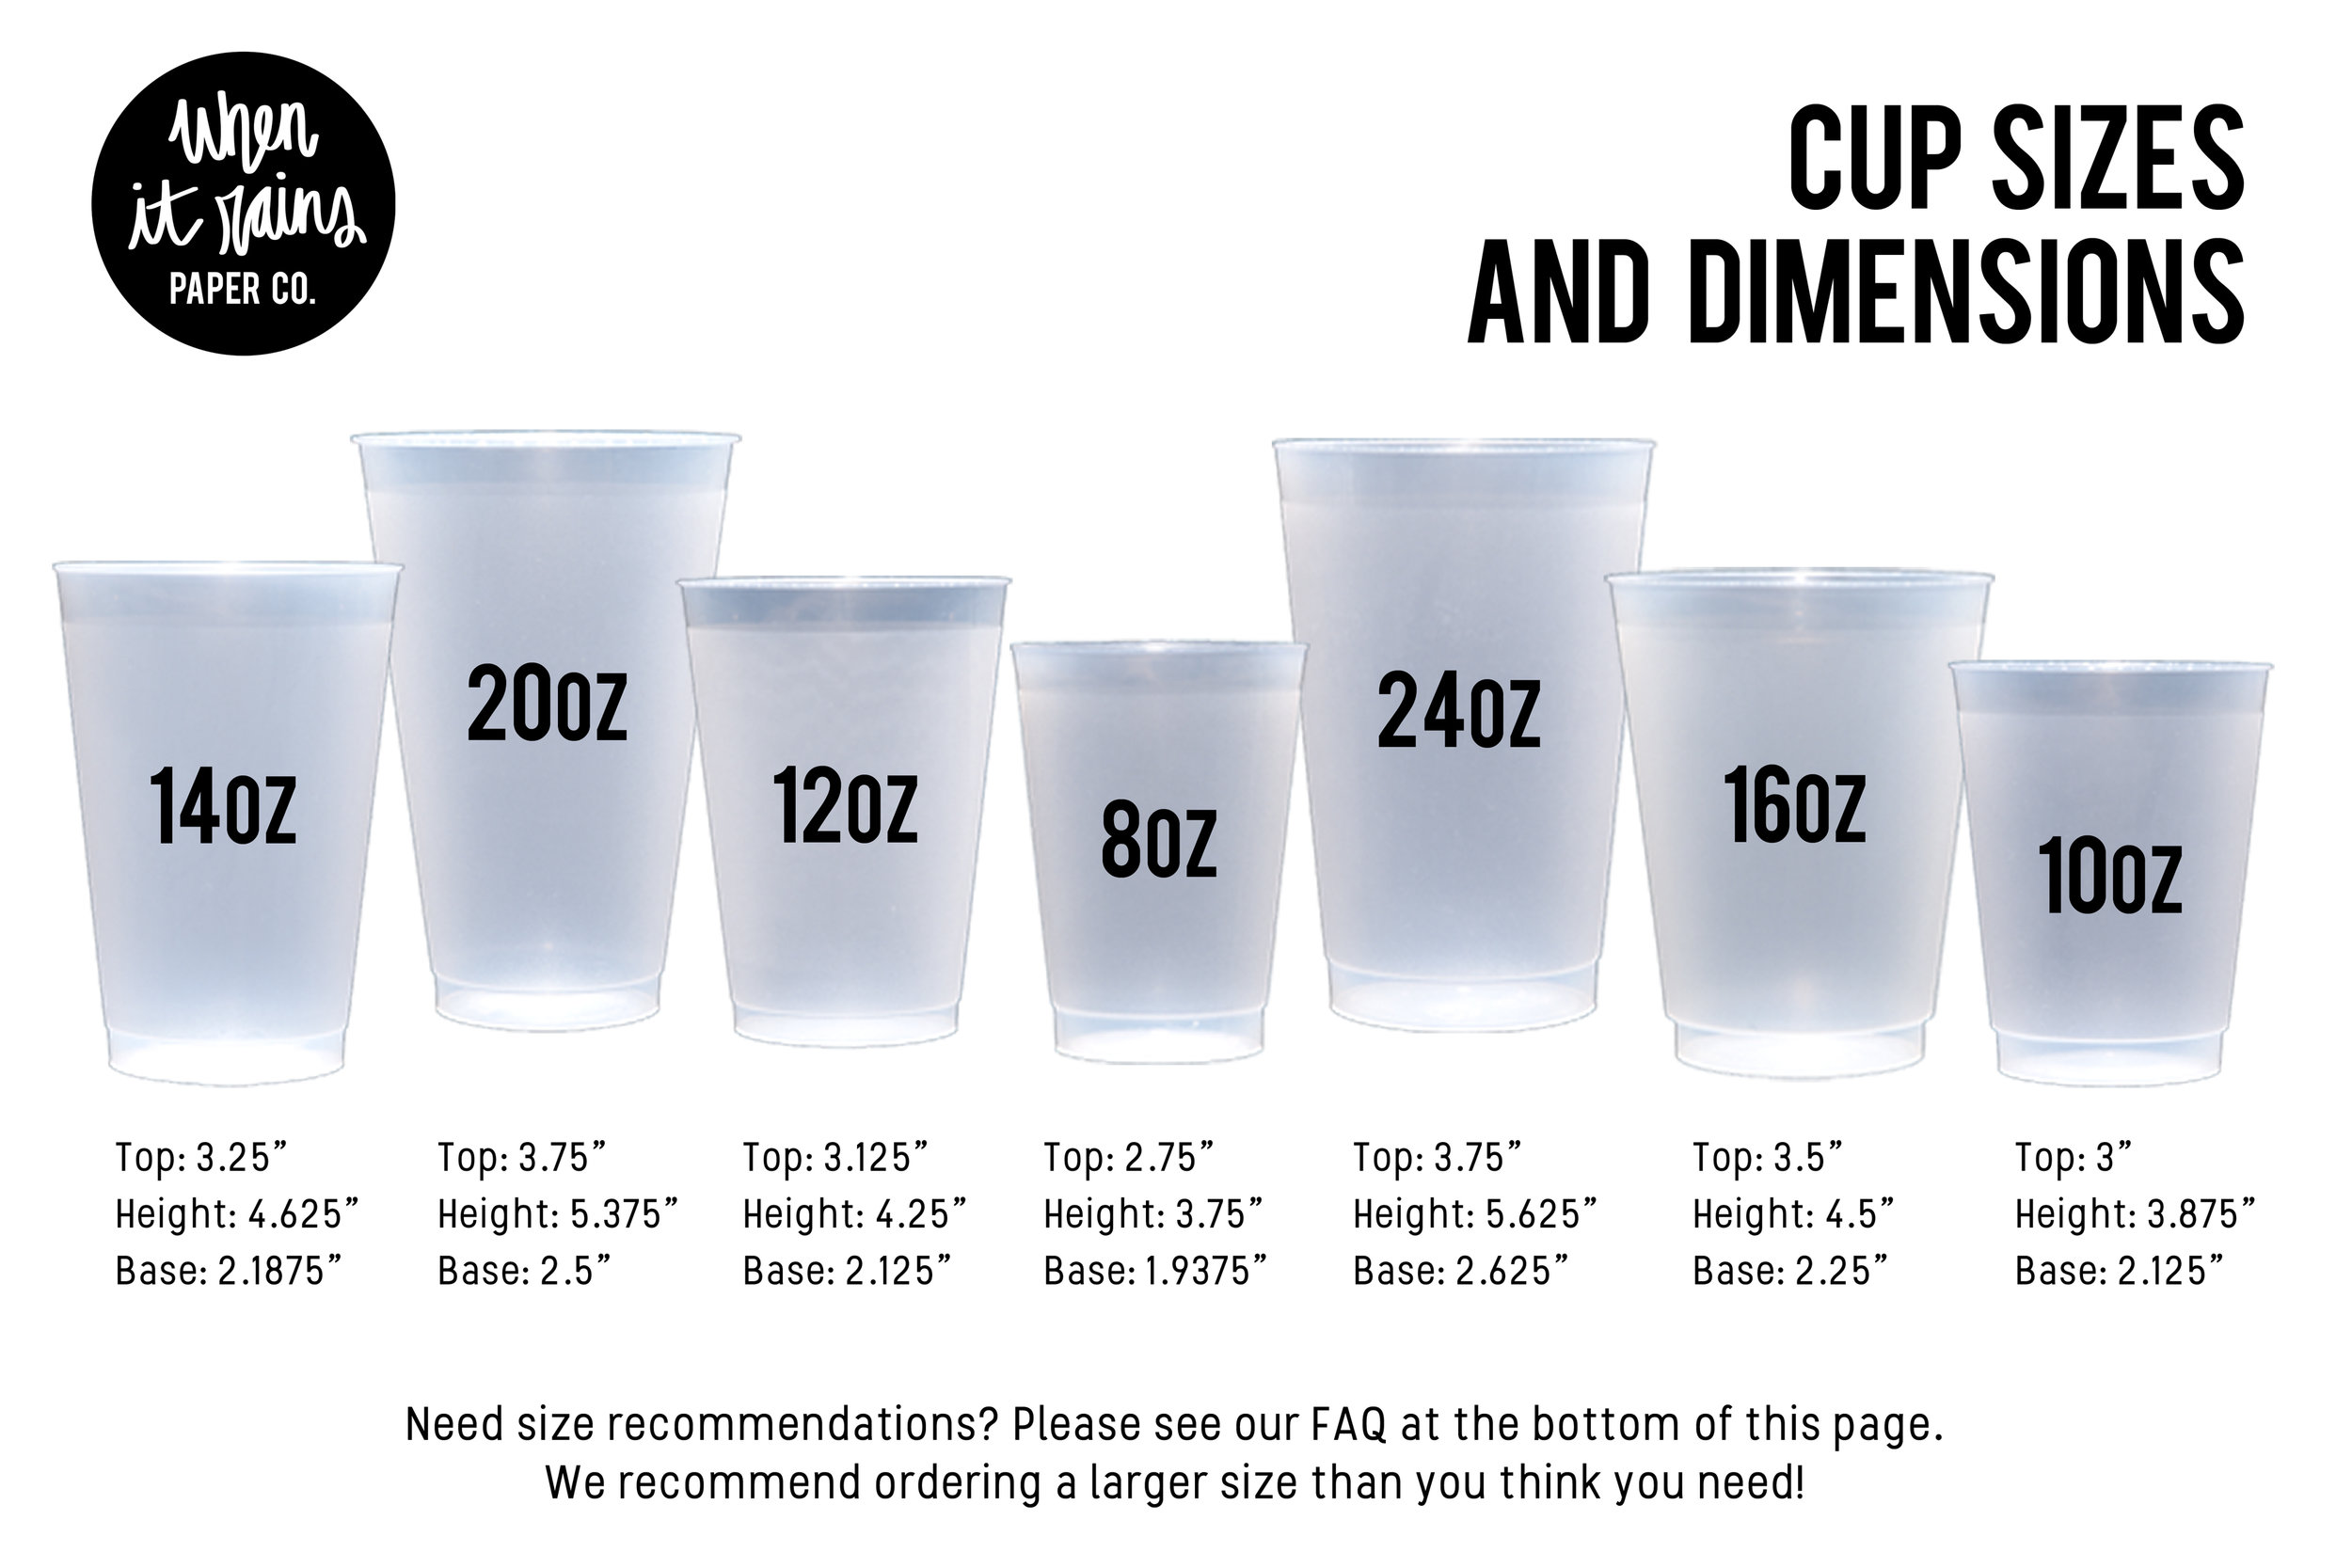 Cup sizes are a lot different in Japan, so I'd - #221325715 added